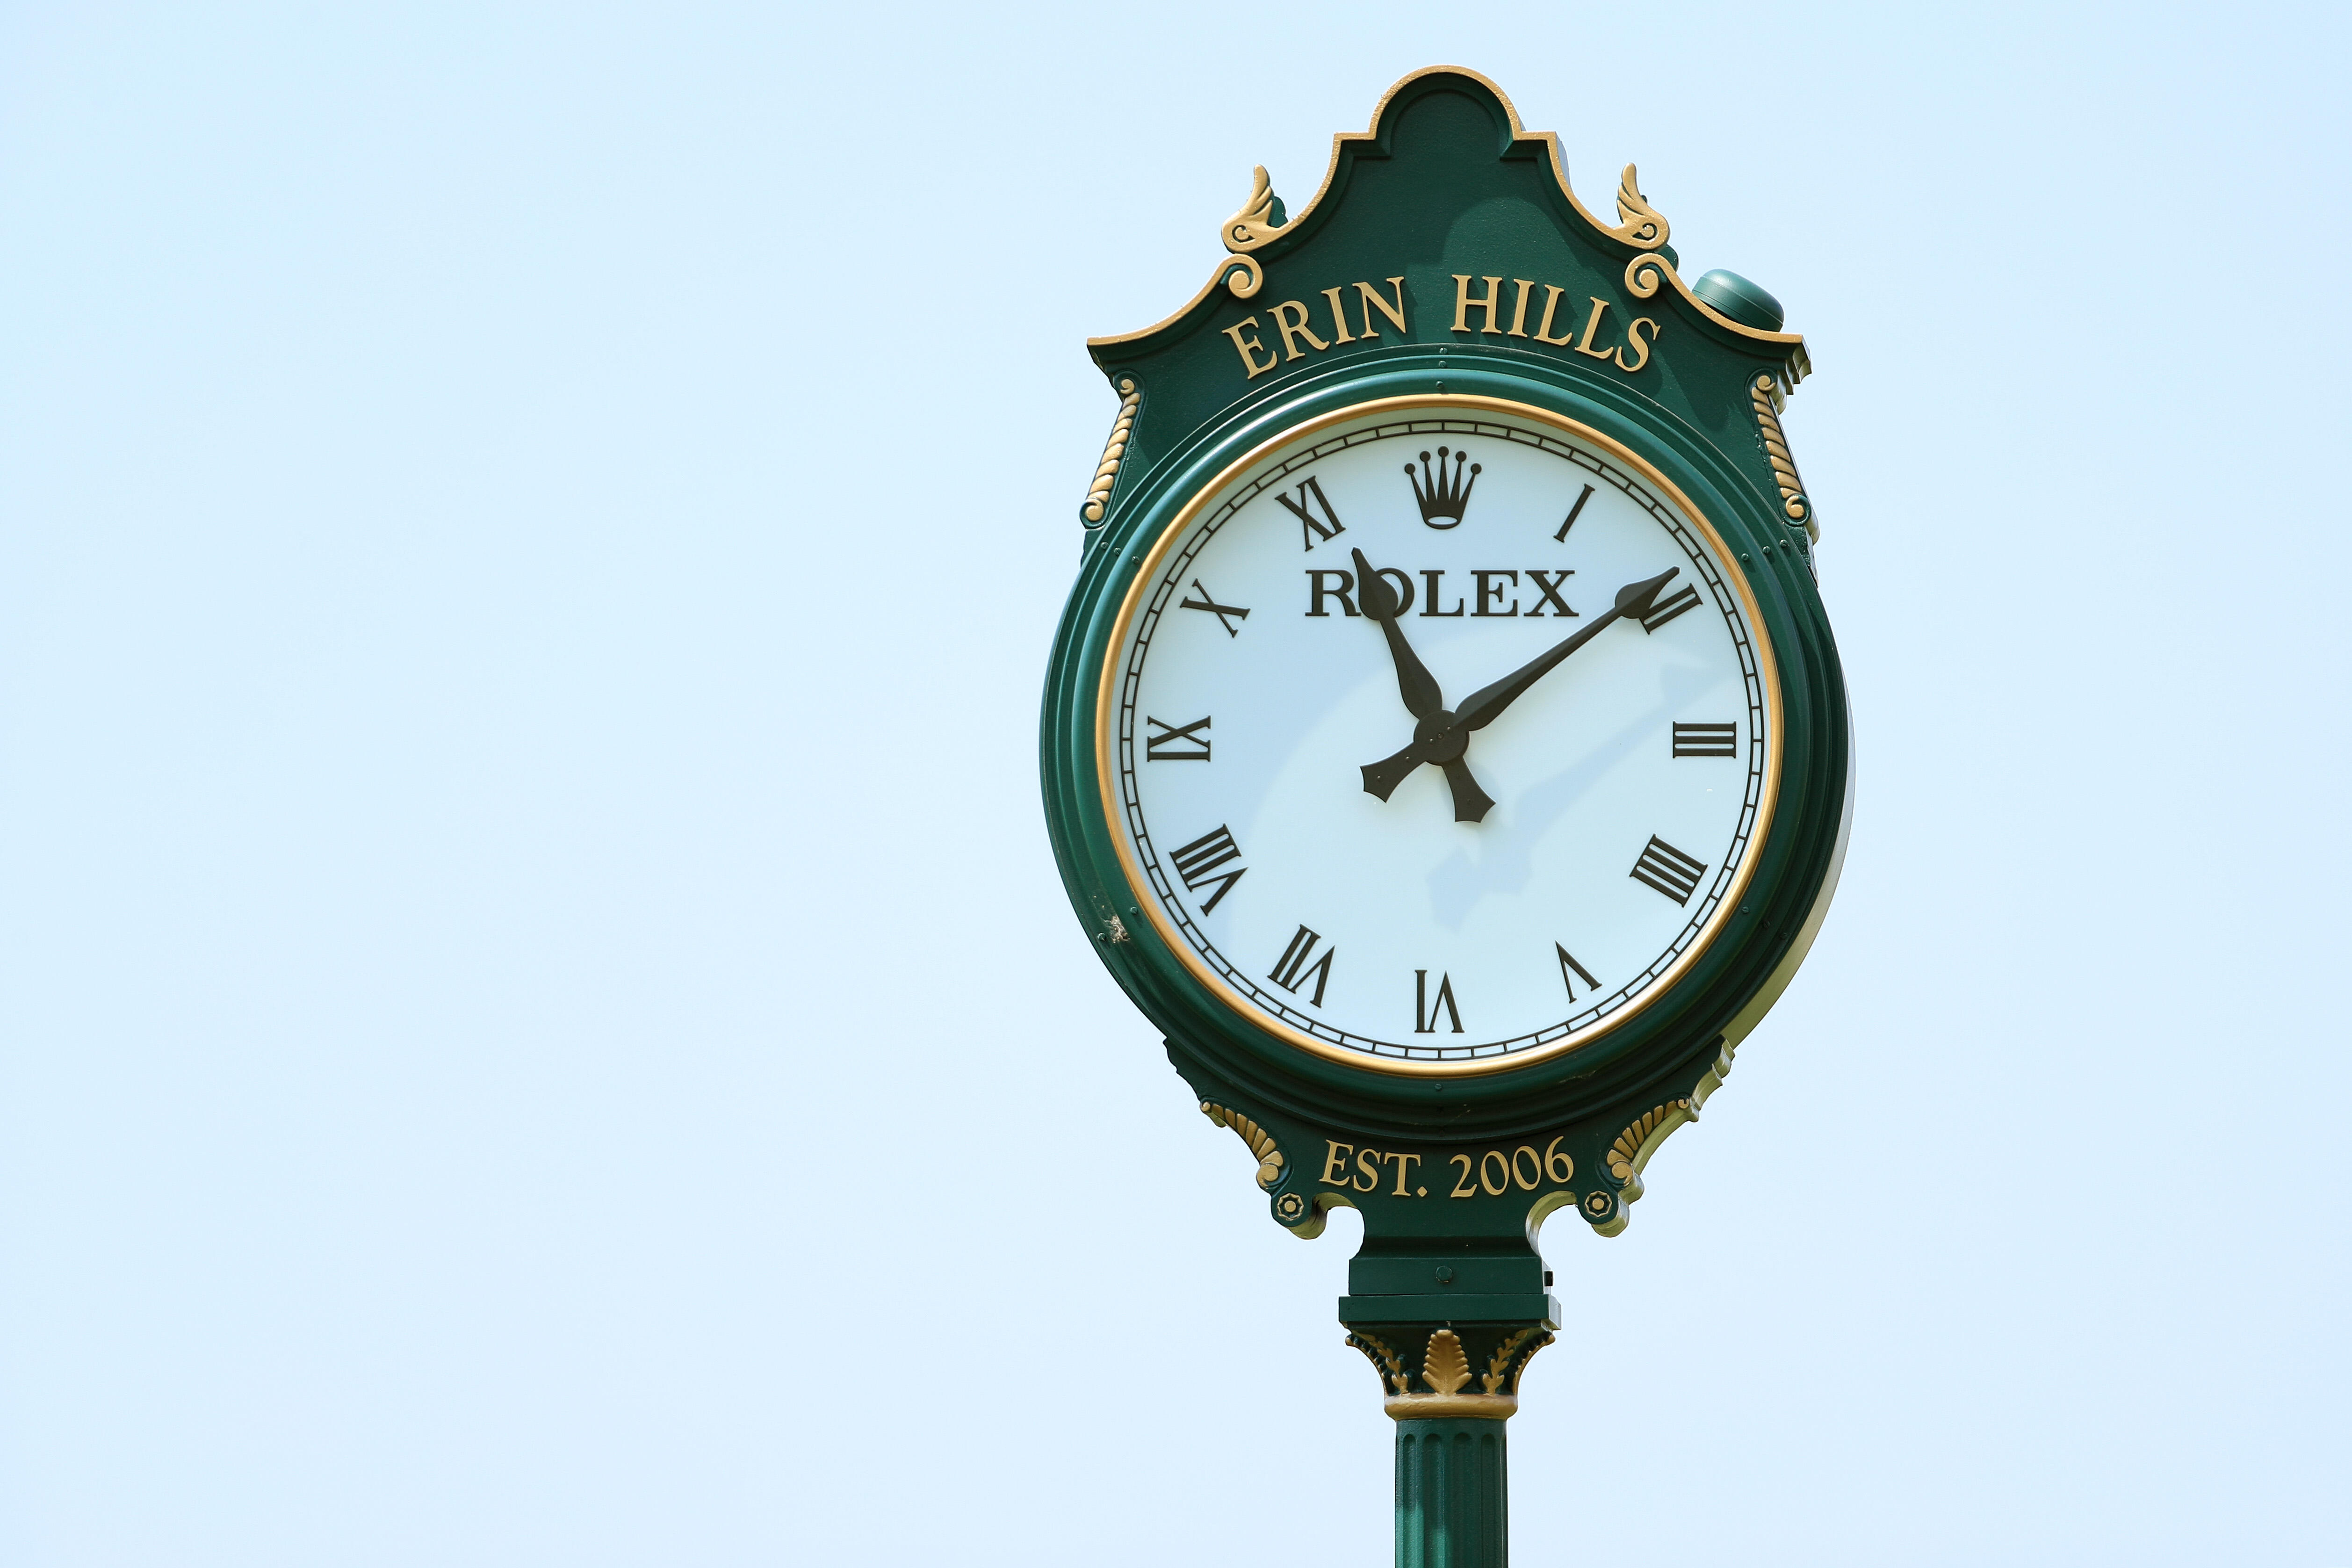 HARTFORD, WI - JUNE 12:  A Rolex clock is displayed during a practice round prior to the 2017 U.S. Open at Erin Hills on June 12, 2017 in Hartford, Wisconsin.  (Photo by Richard Heathcote/Getty Images)